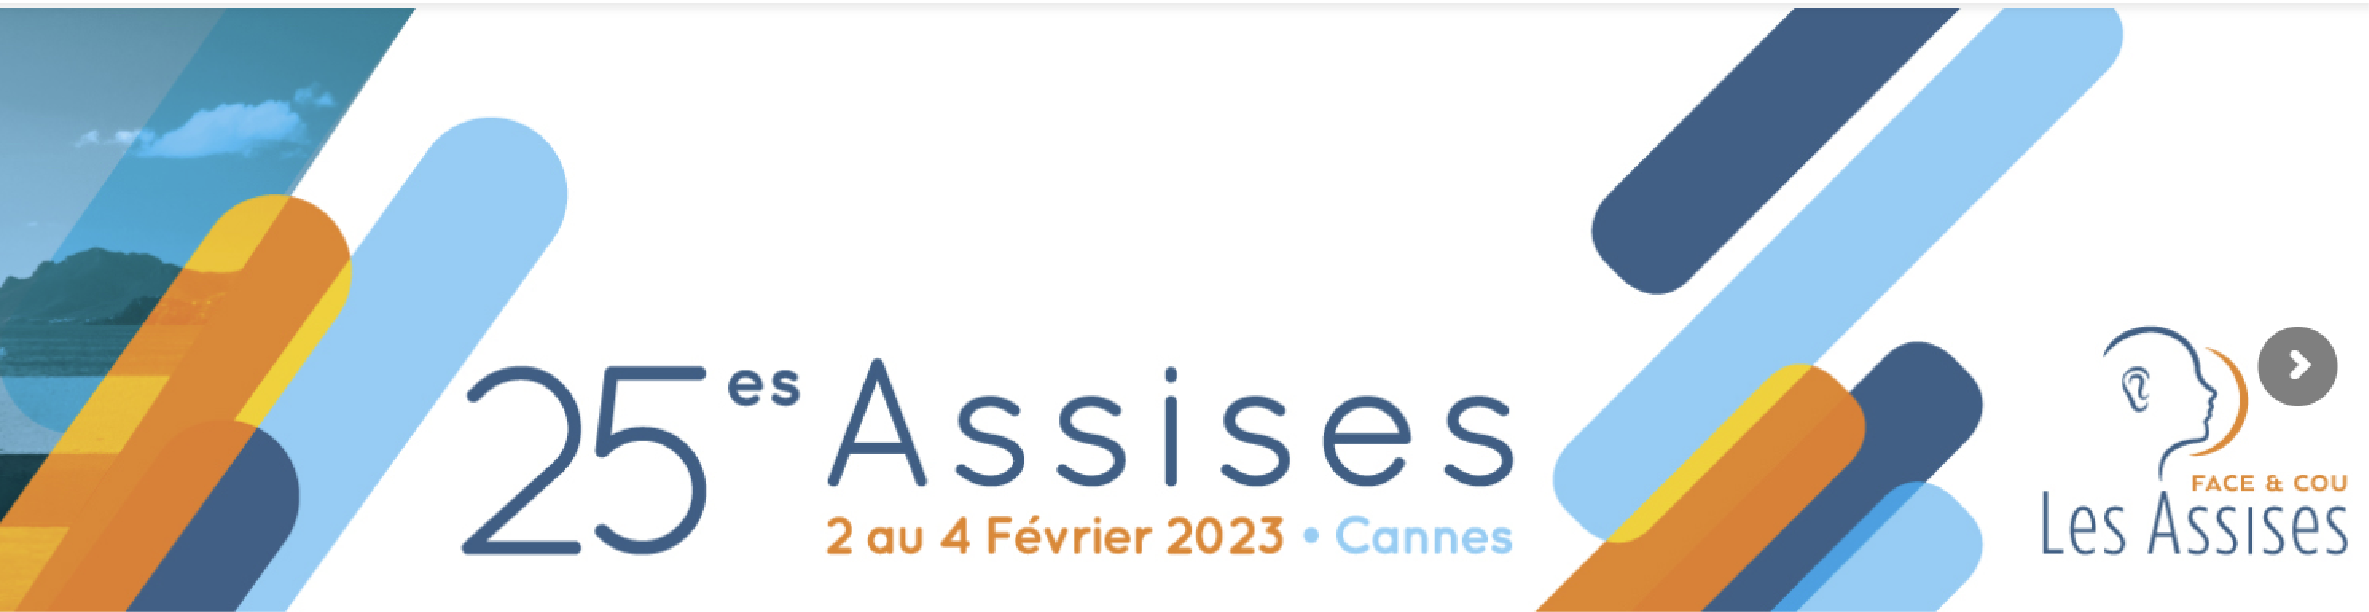 Assises Orthodontie & Chirurgie Orthognathique - AOCO 2023